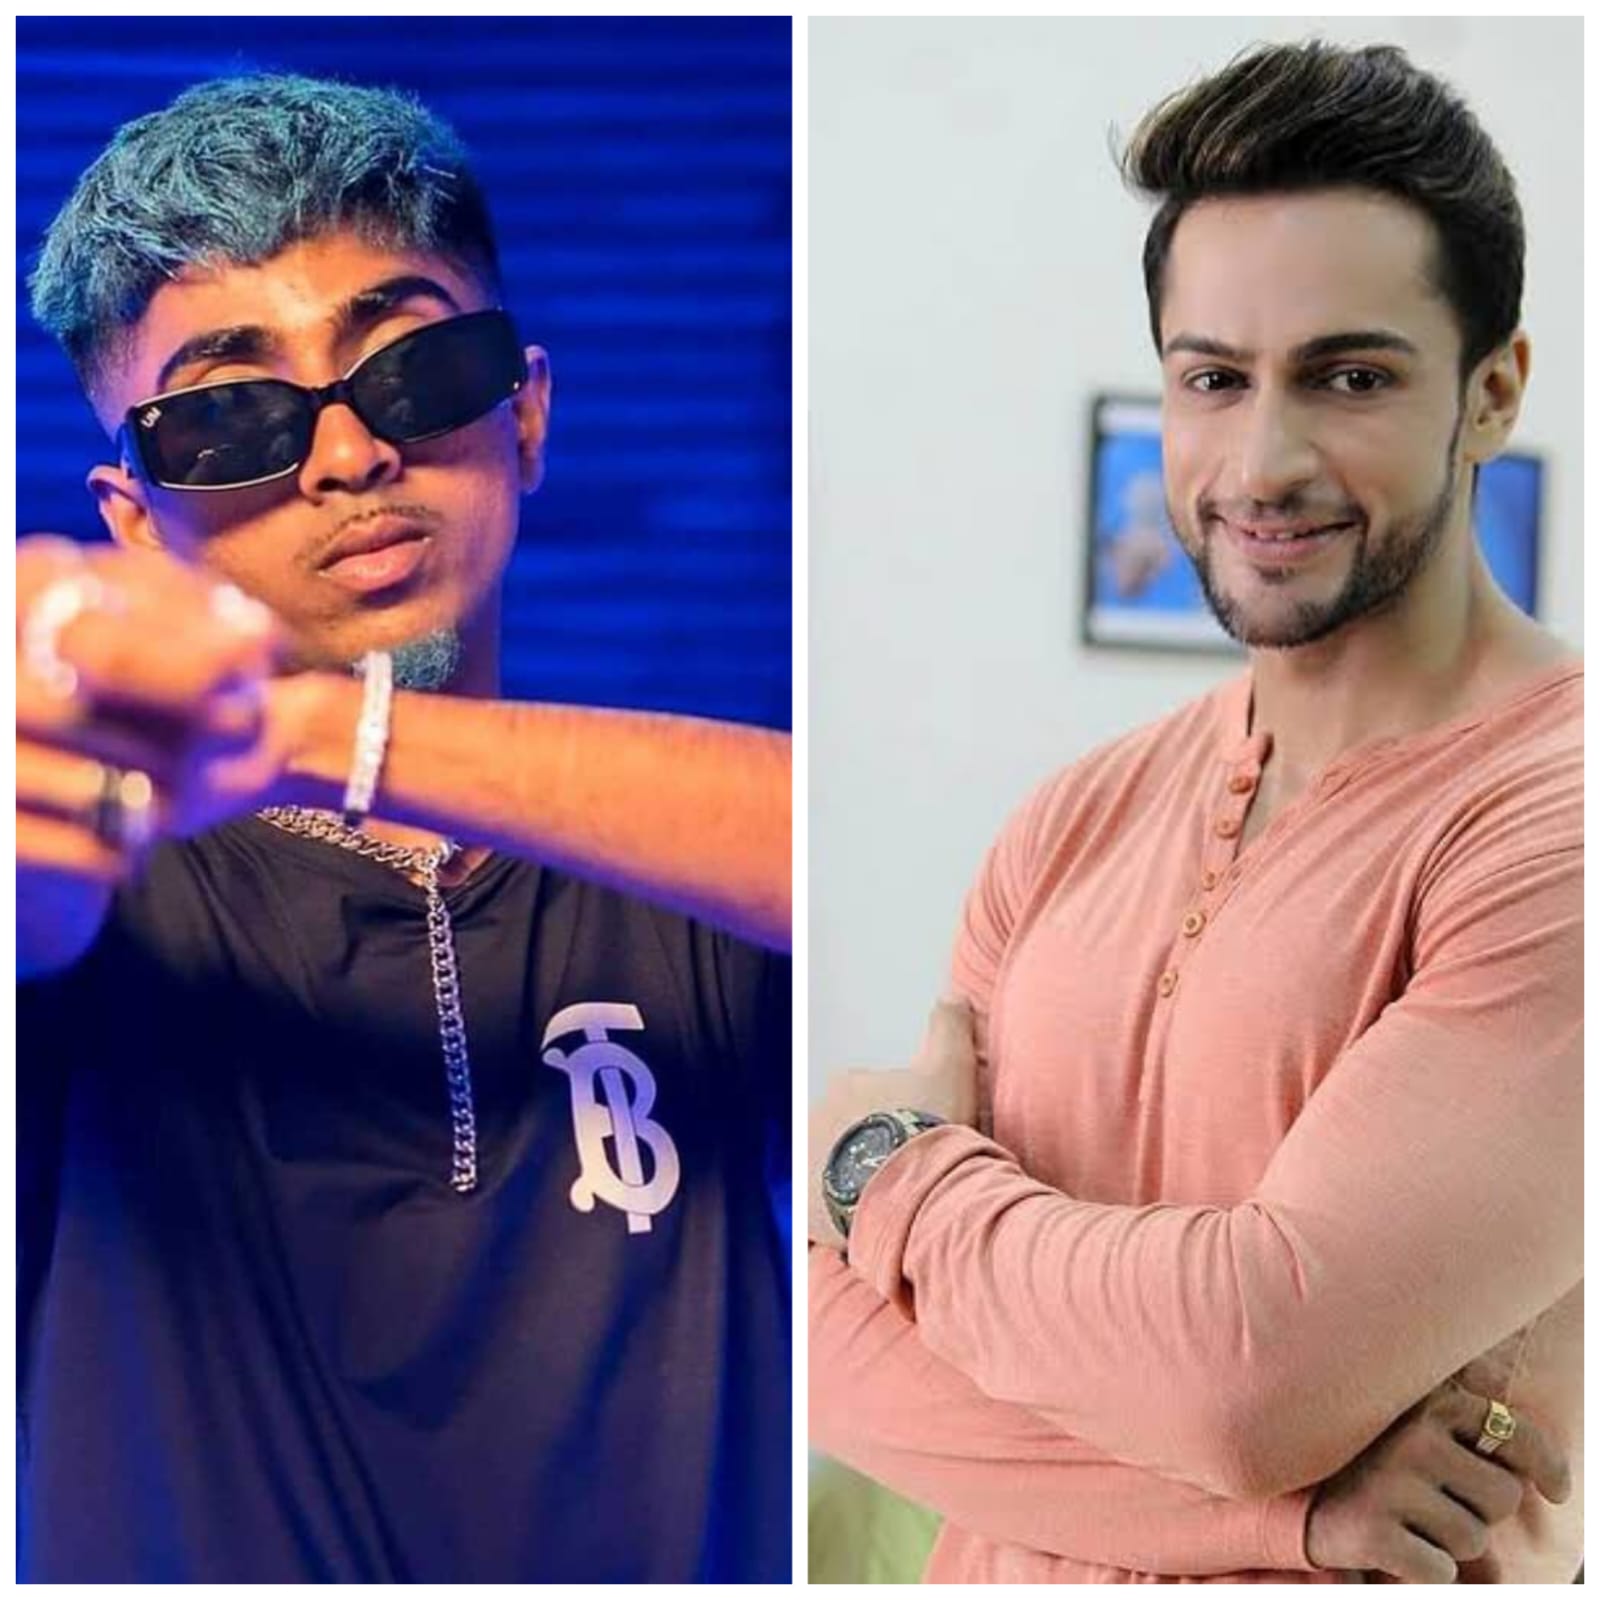 Shalin Bhanot passes derogatory comments on MC Stan's mother during their fight; provokes the latter intentionally